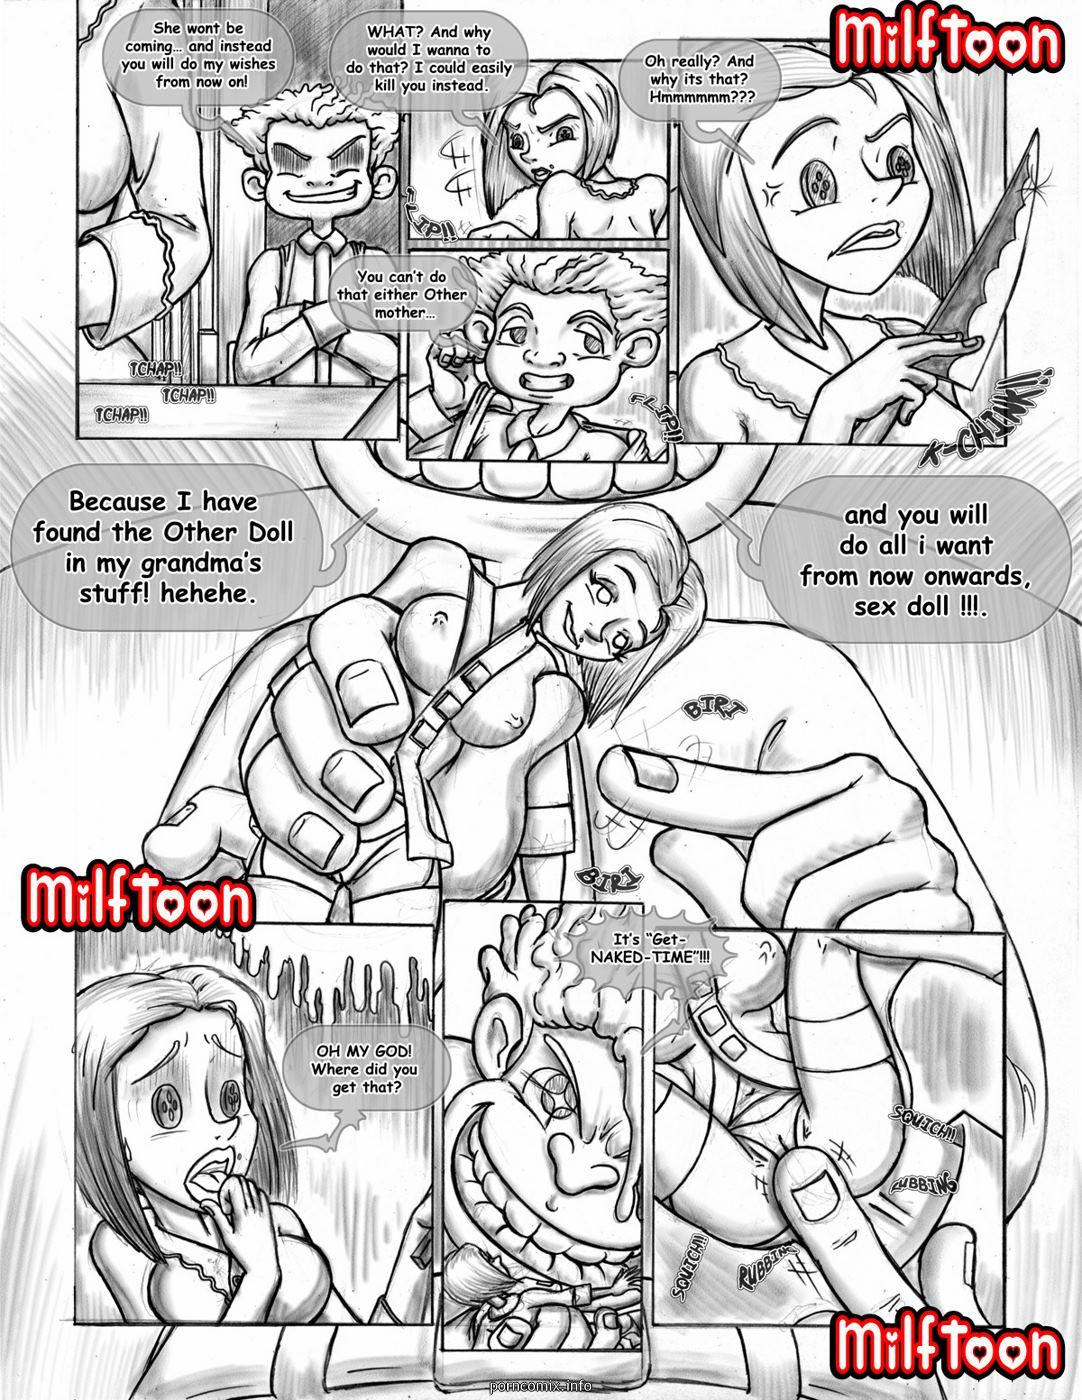 Milftoon - Coraline page 2